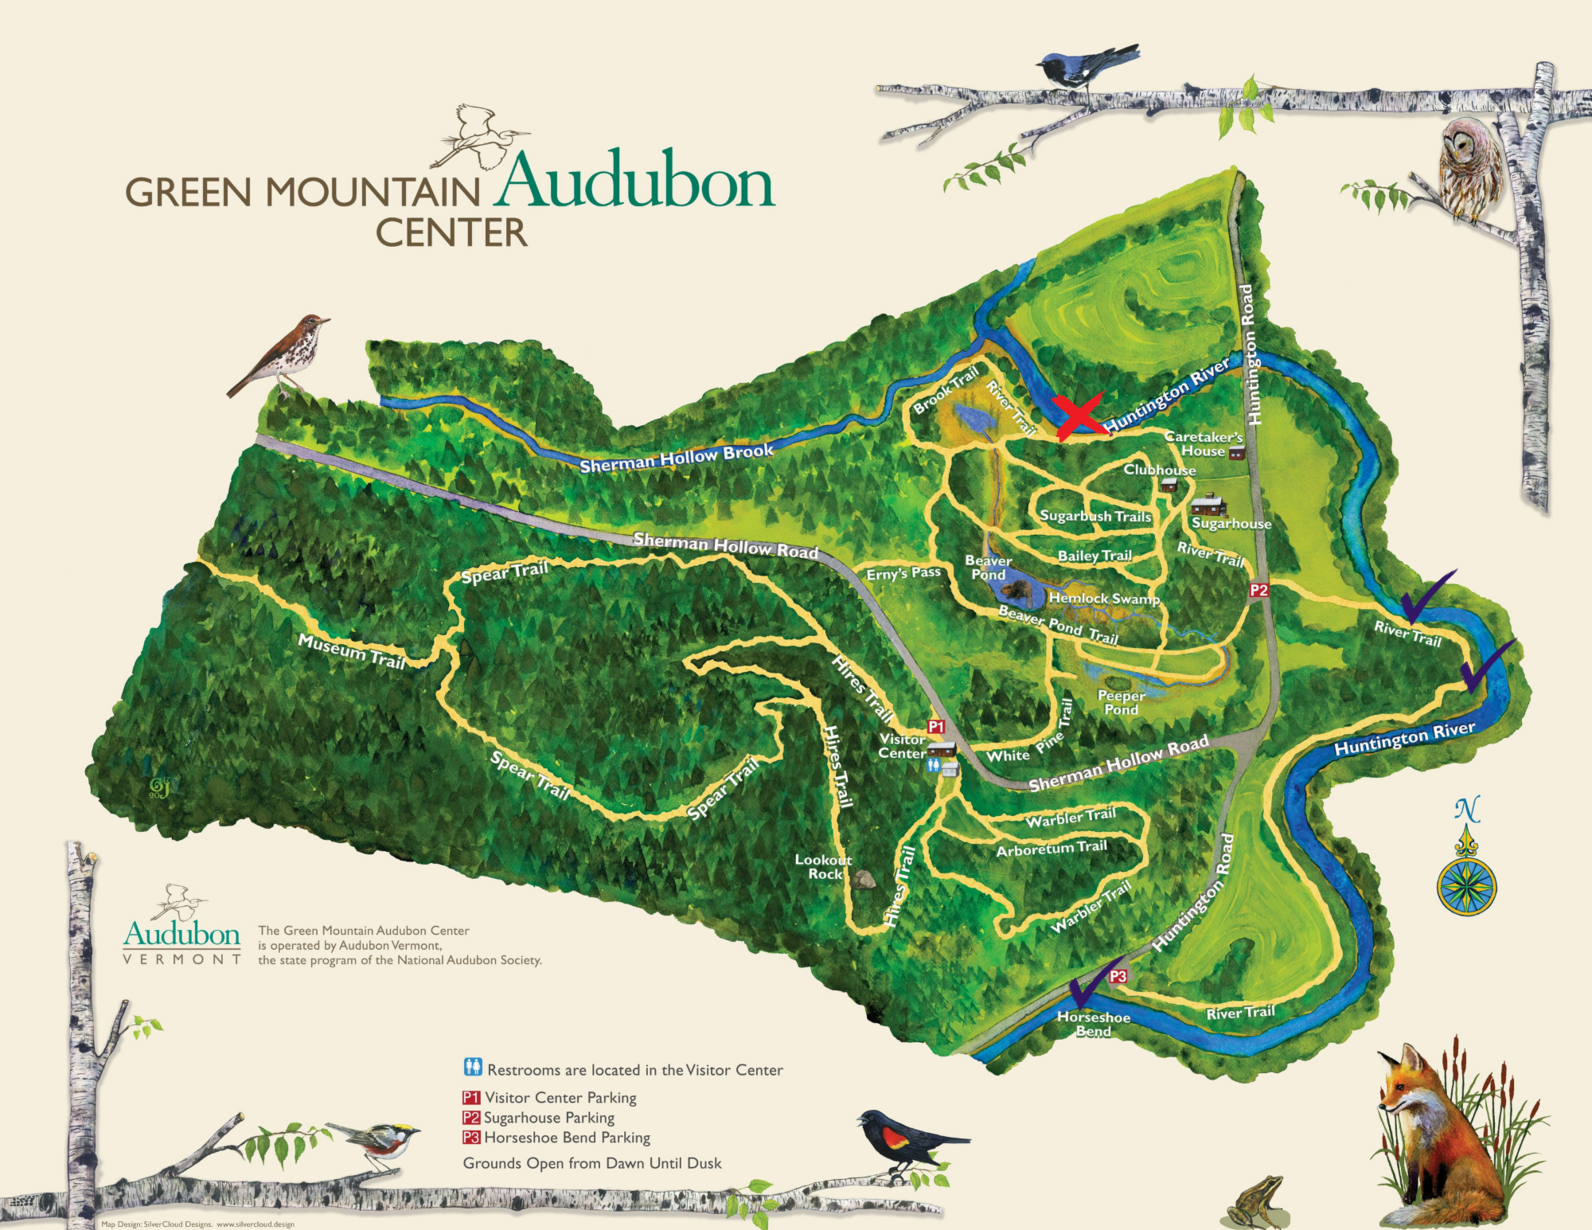 A trail map of the Green Mountain Audubon Center. Two spots are marked with check marks on the section of the River Trail across Main Street. The section of River Trail on the west side is marked with an X